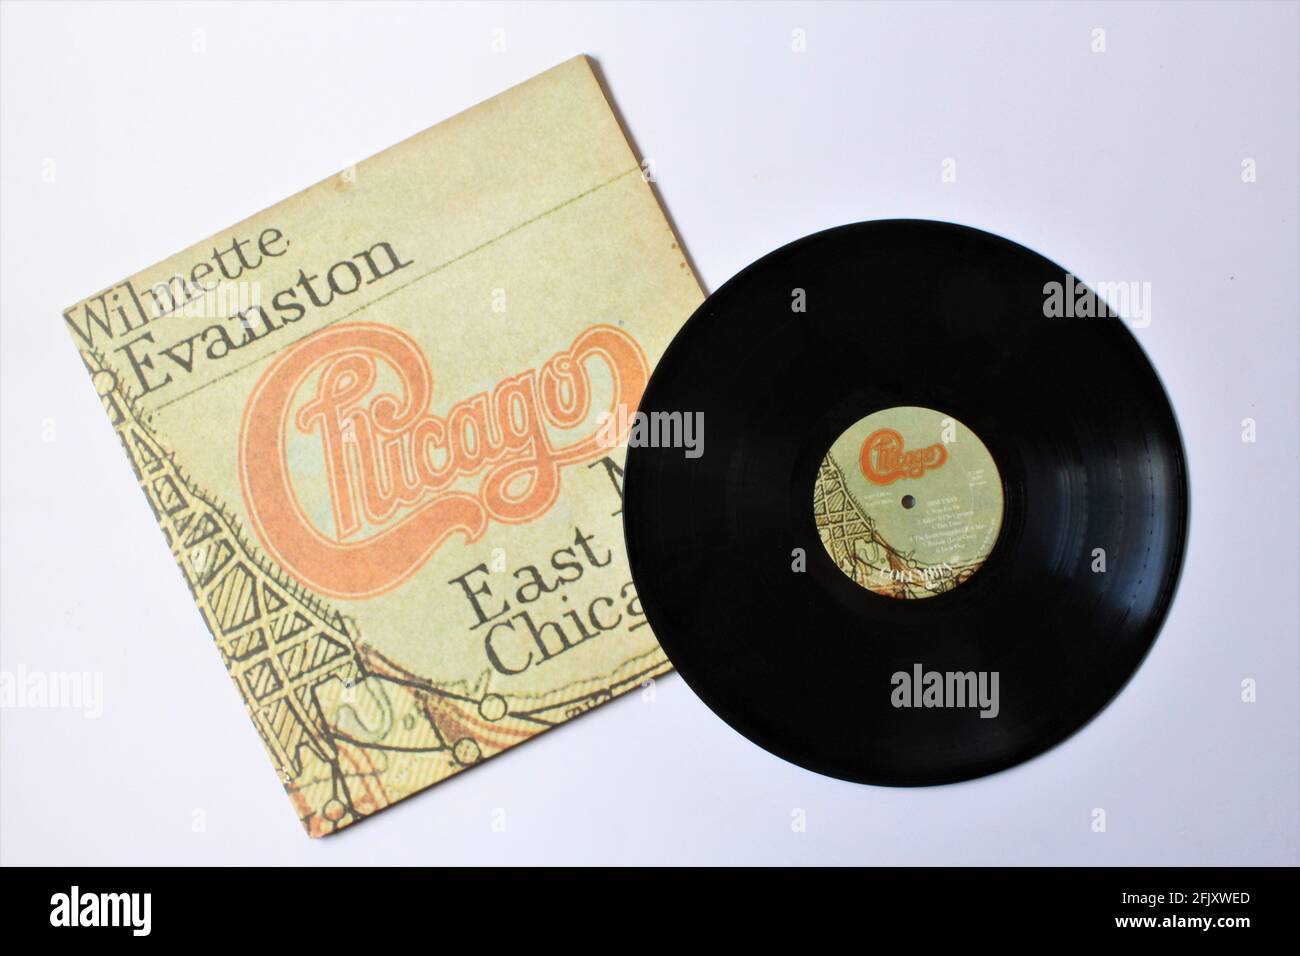 Rock band, Chicago music album on vinyl record LP disc. Titled: Chicago XI Stock Photo